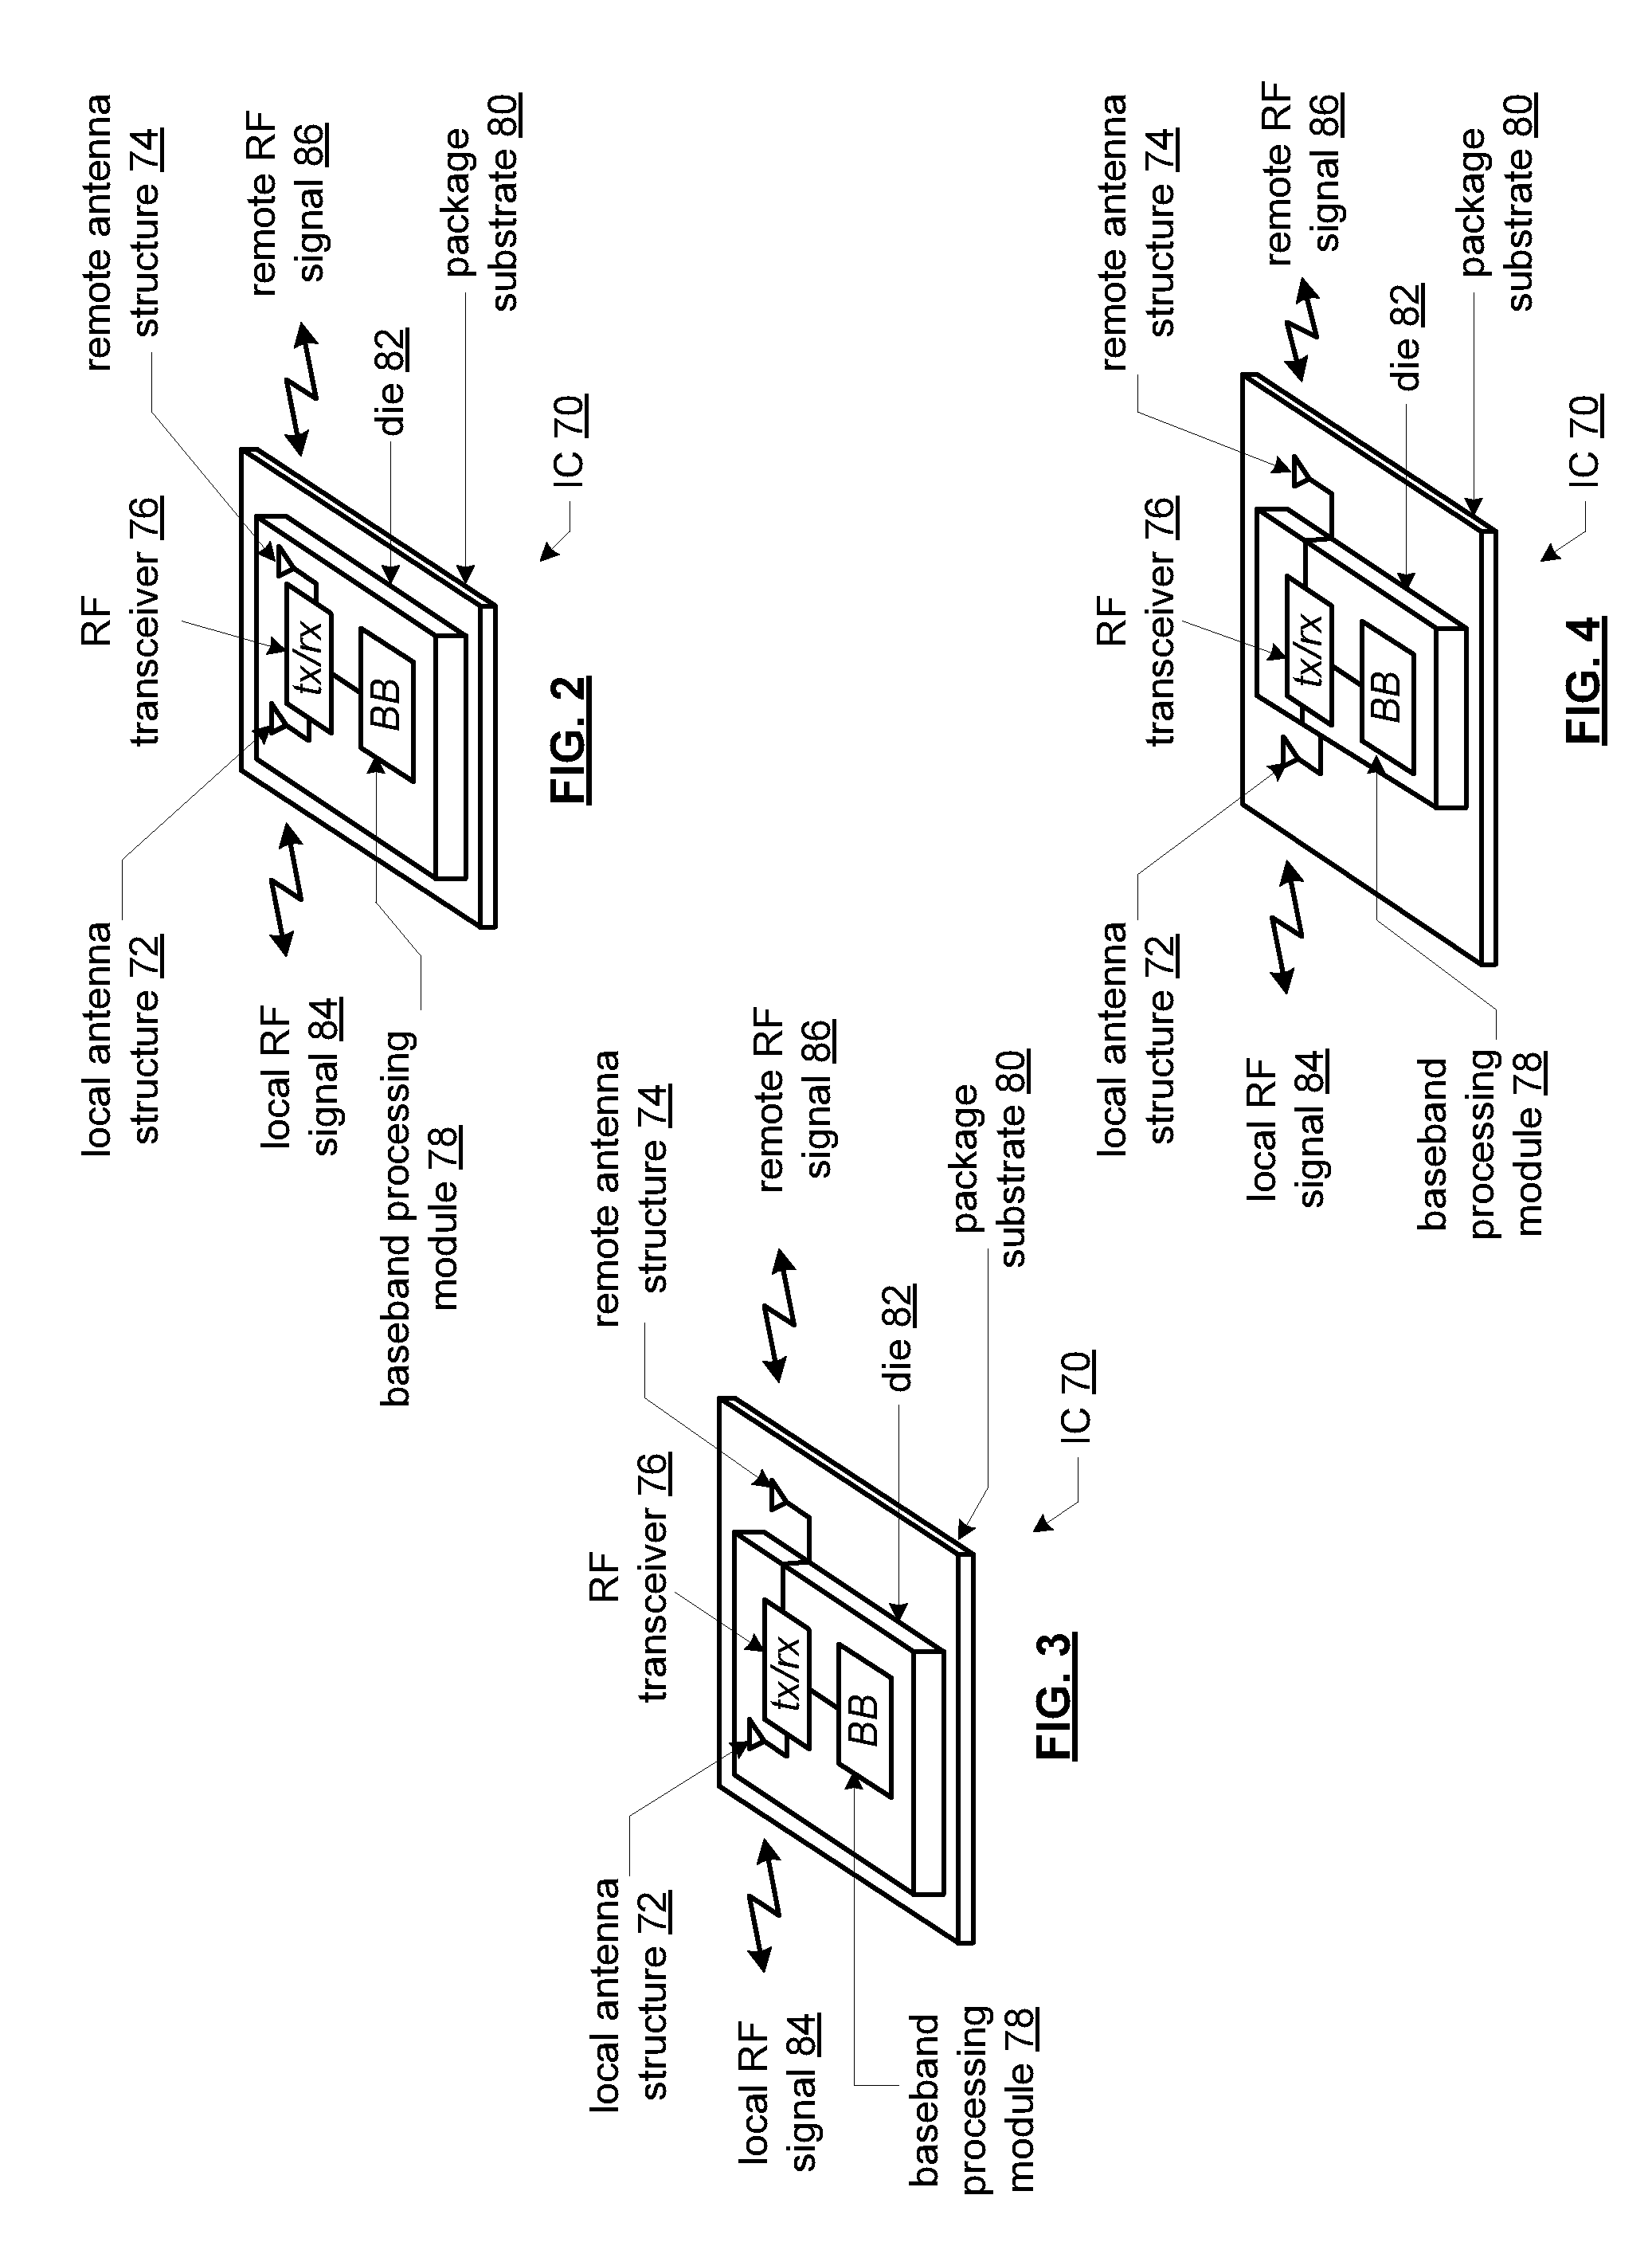 Integrated circuit with electromagnetic intrachip communication and methods for use therewith